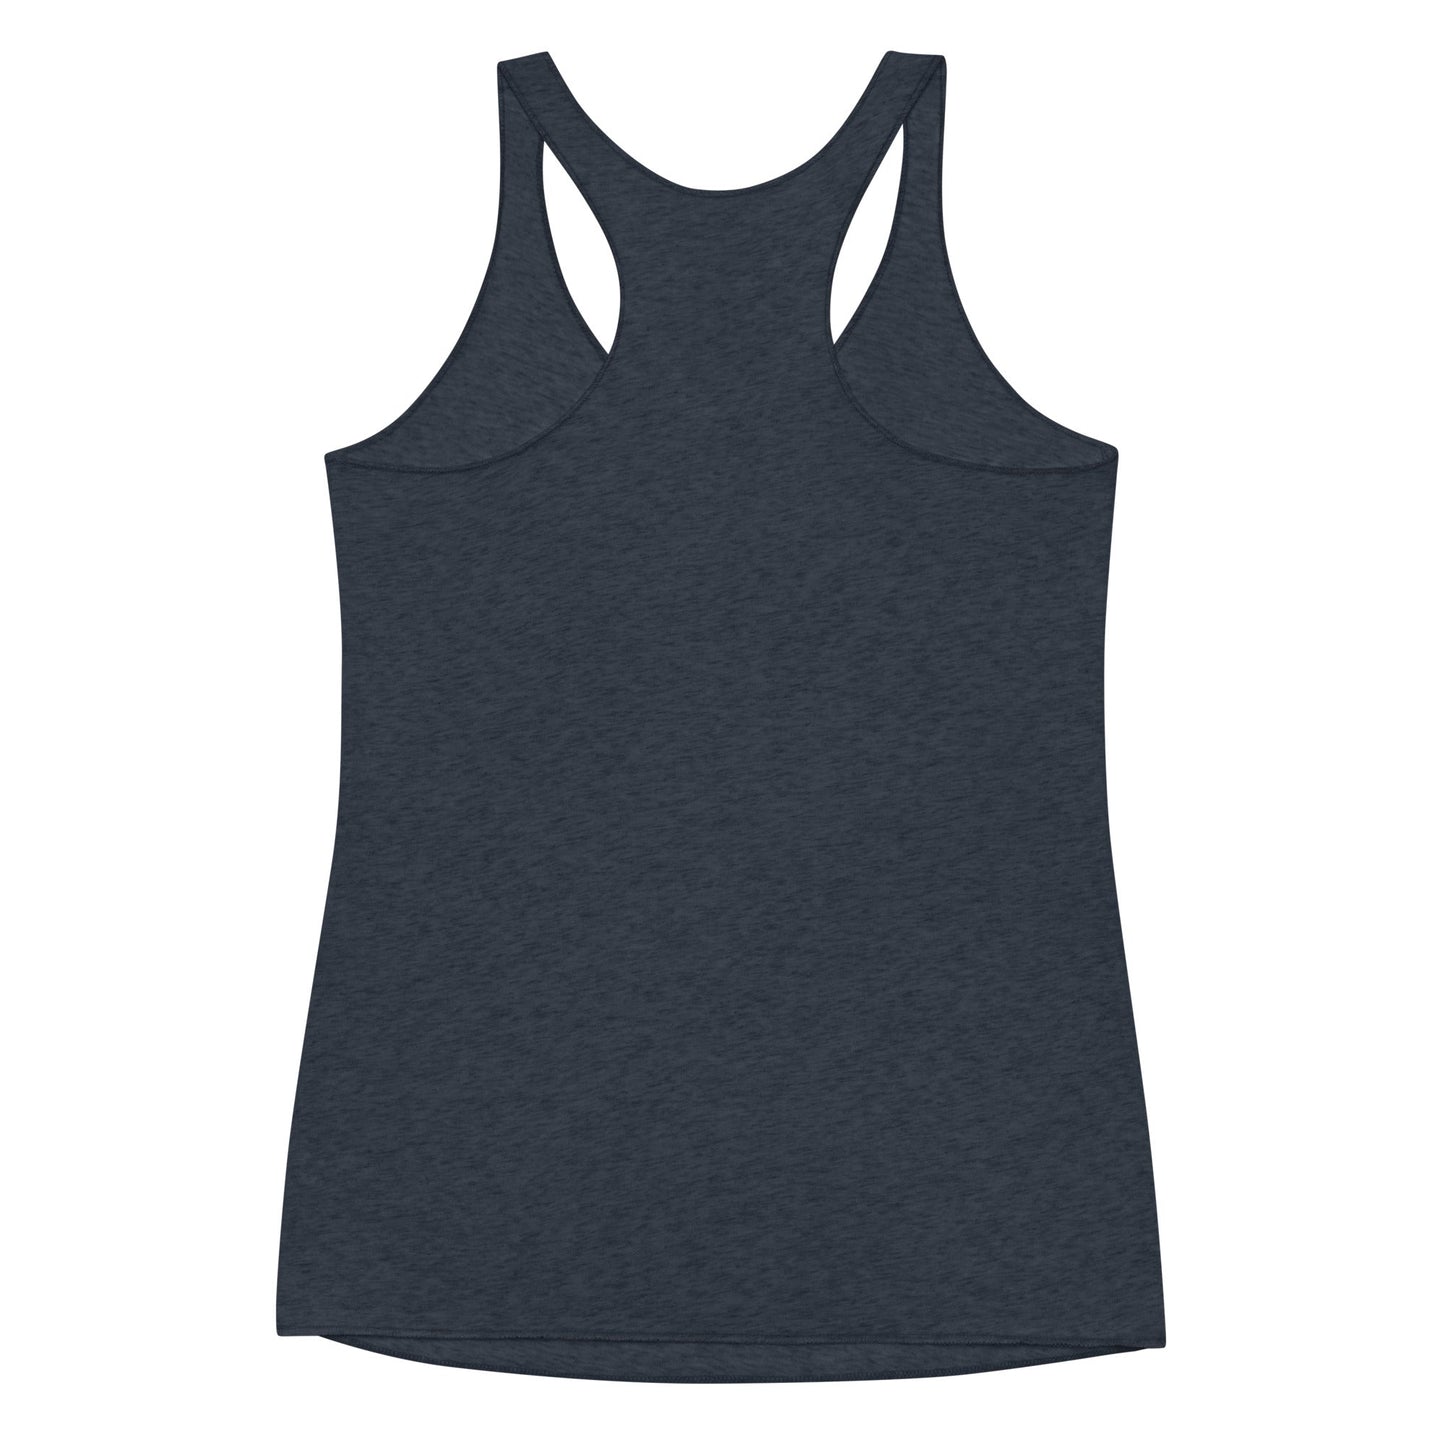 Be Extra! Moon Raver Women's Racerback Tank - BeExtra! Apparel & More